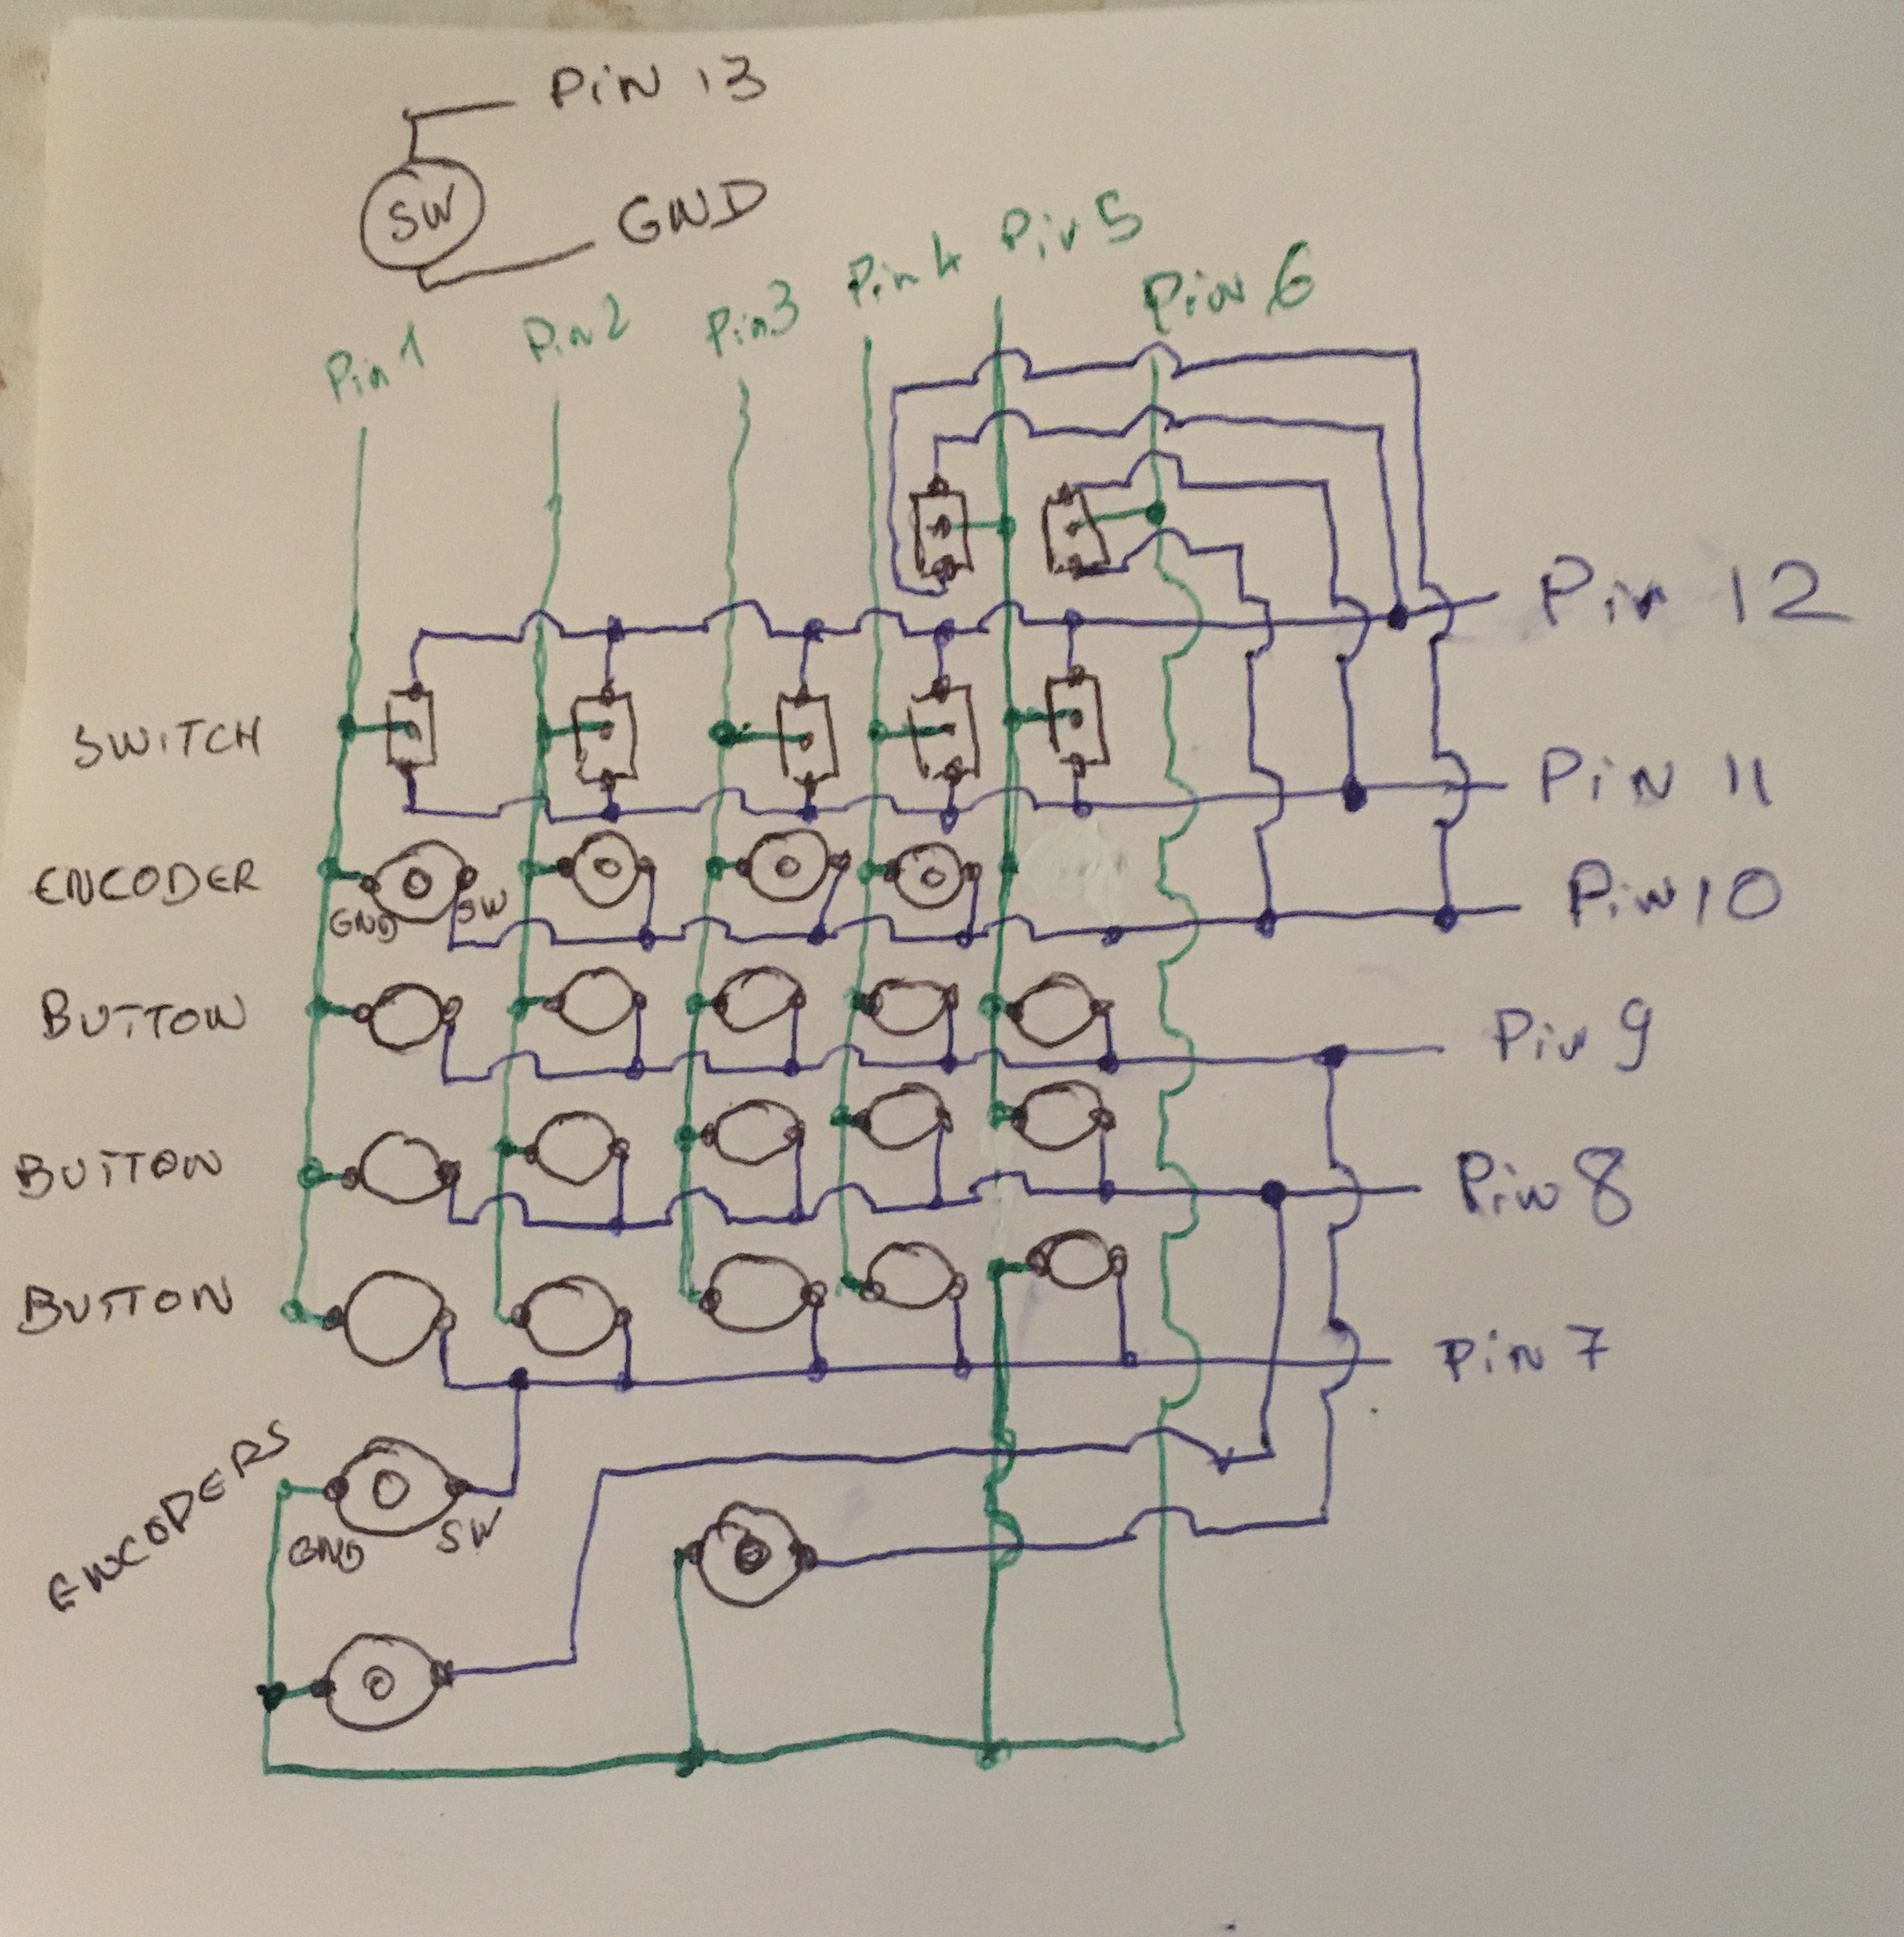 Wiring Diagram for sim racing Button Box - Project Guidance - Arduino Forum